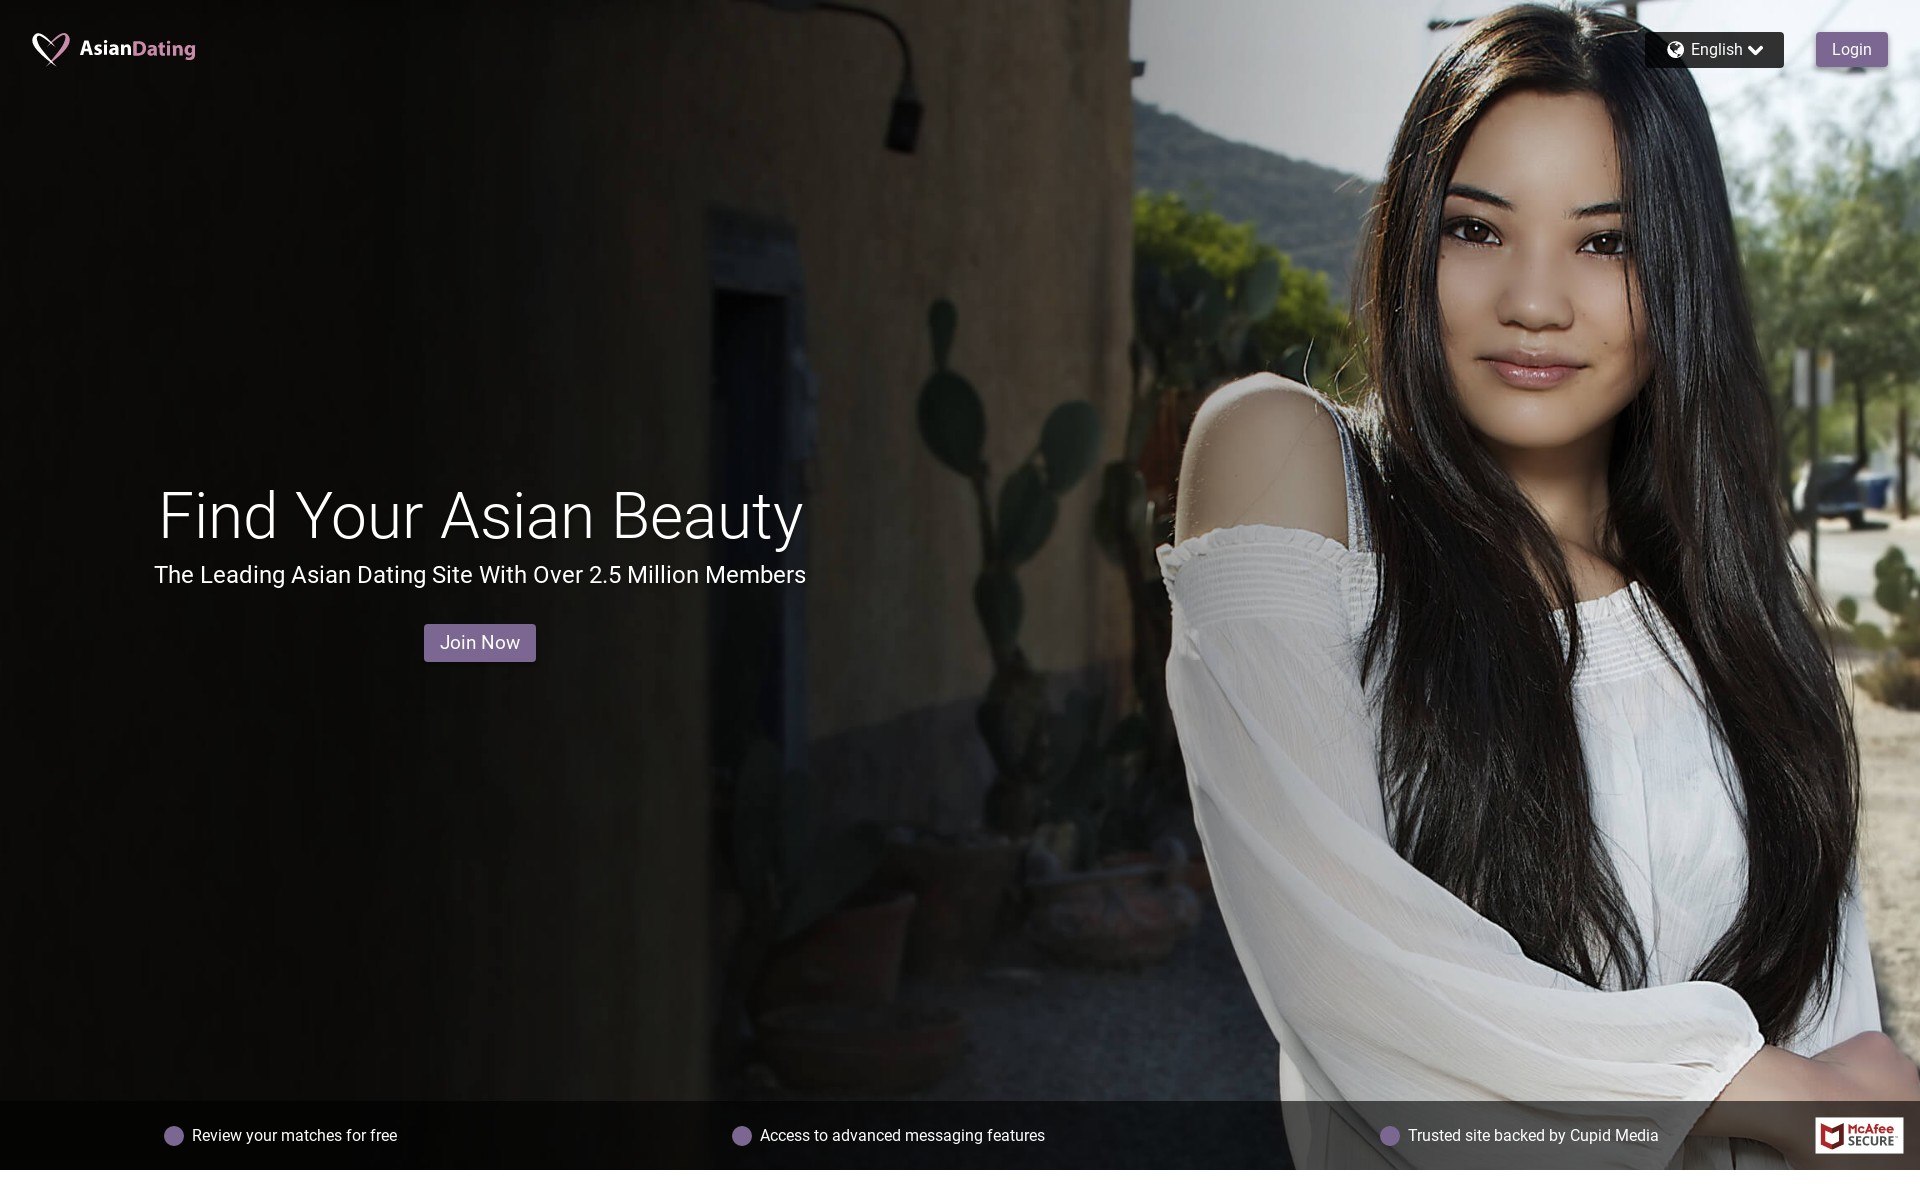 Free american asian dating sites